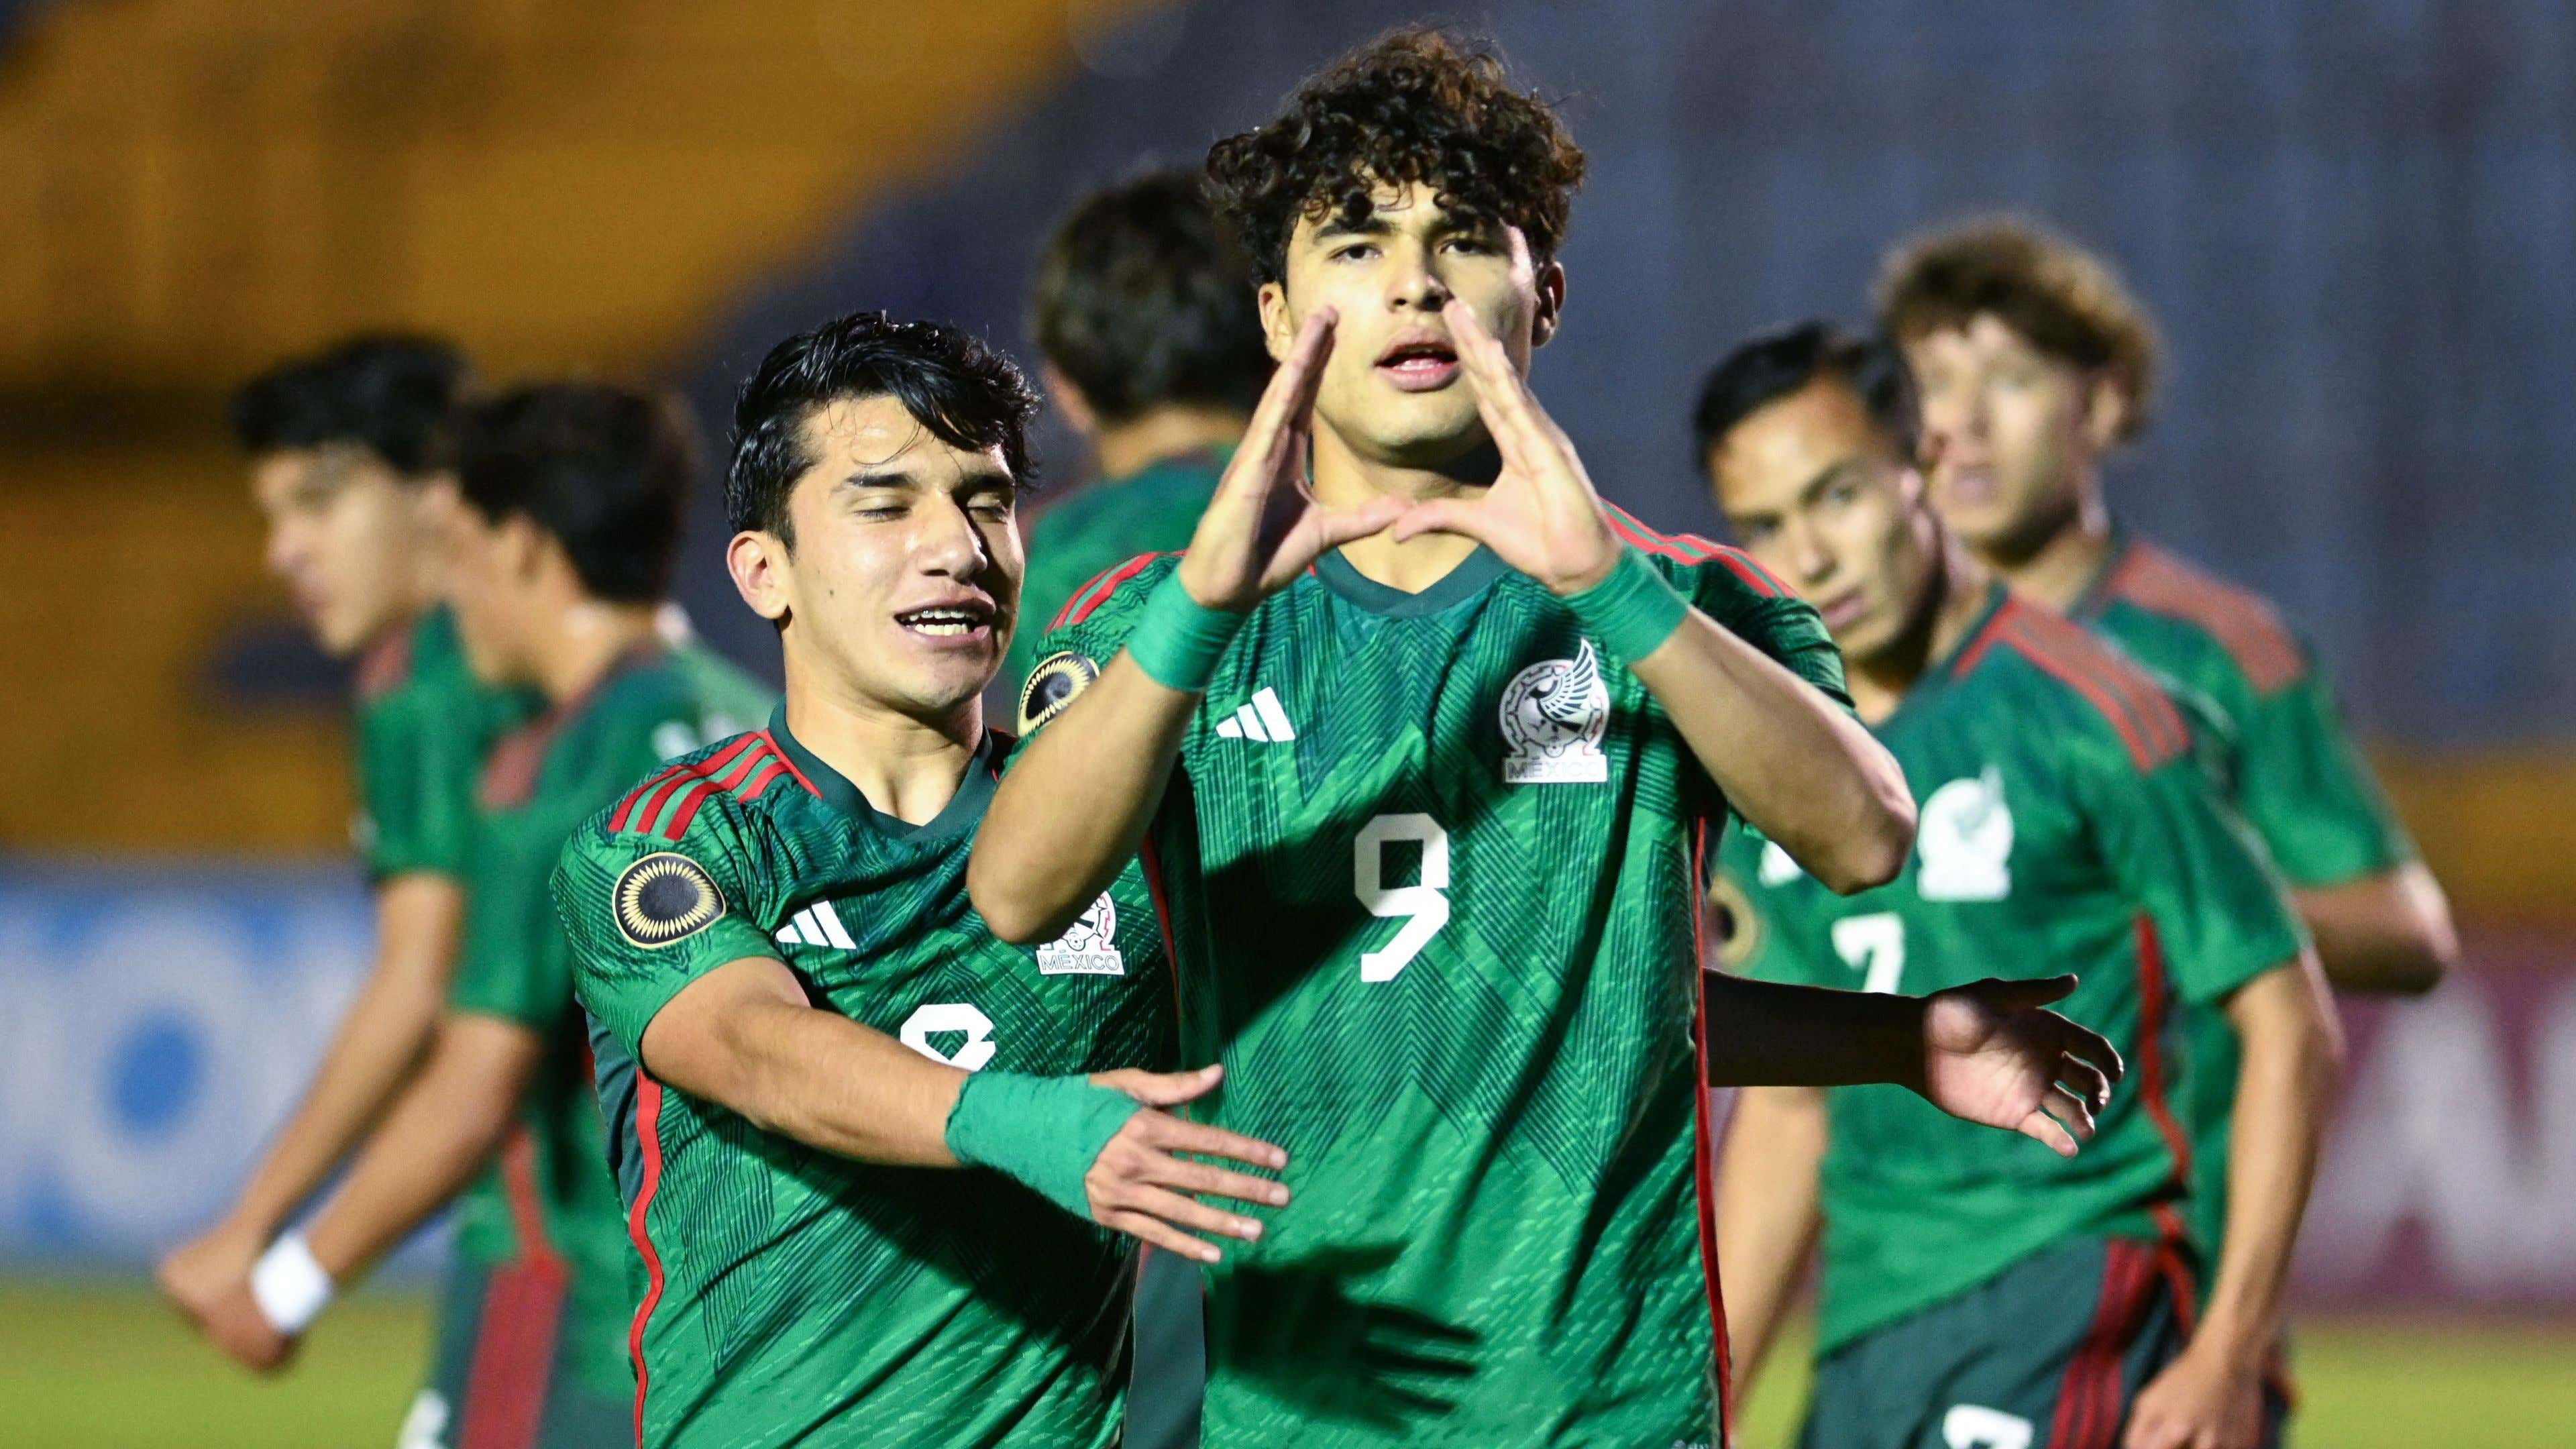 STREAM: Watch New Zealand play Mexico at FIFA U-17 Men's World Cup